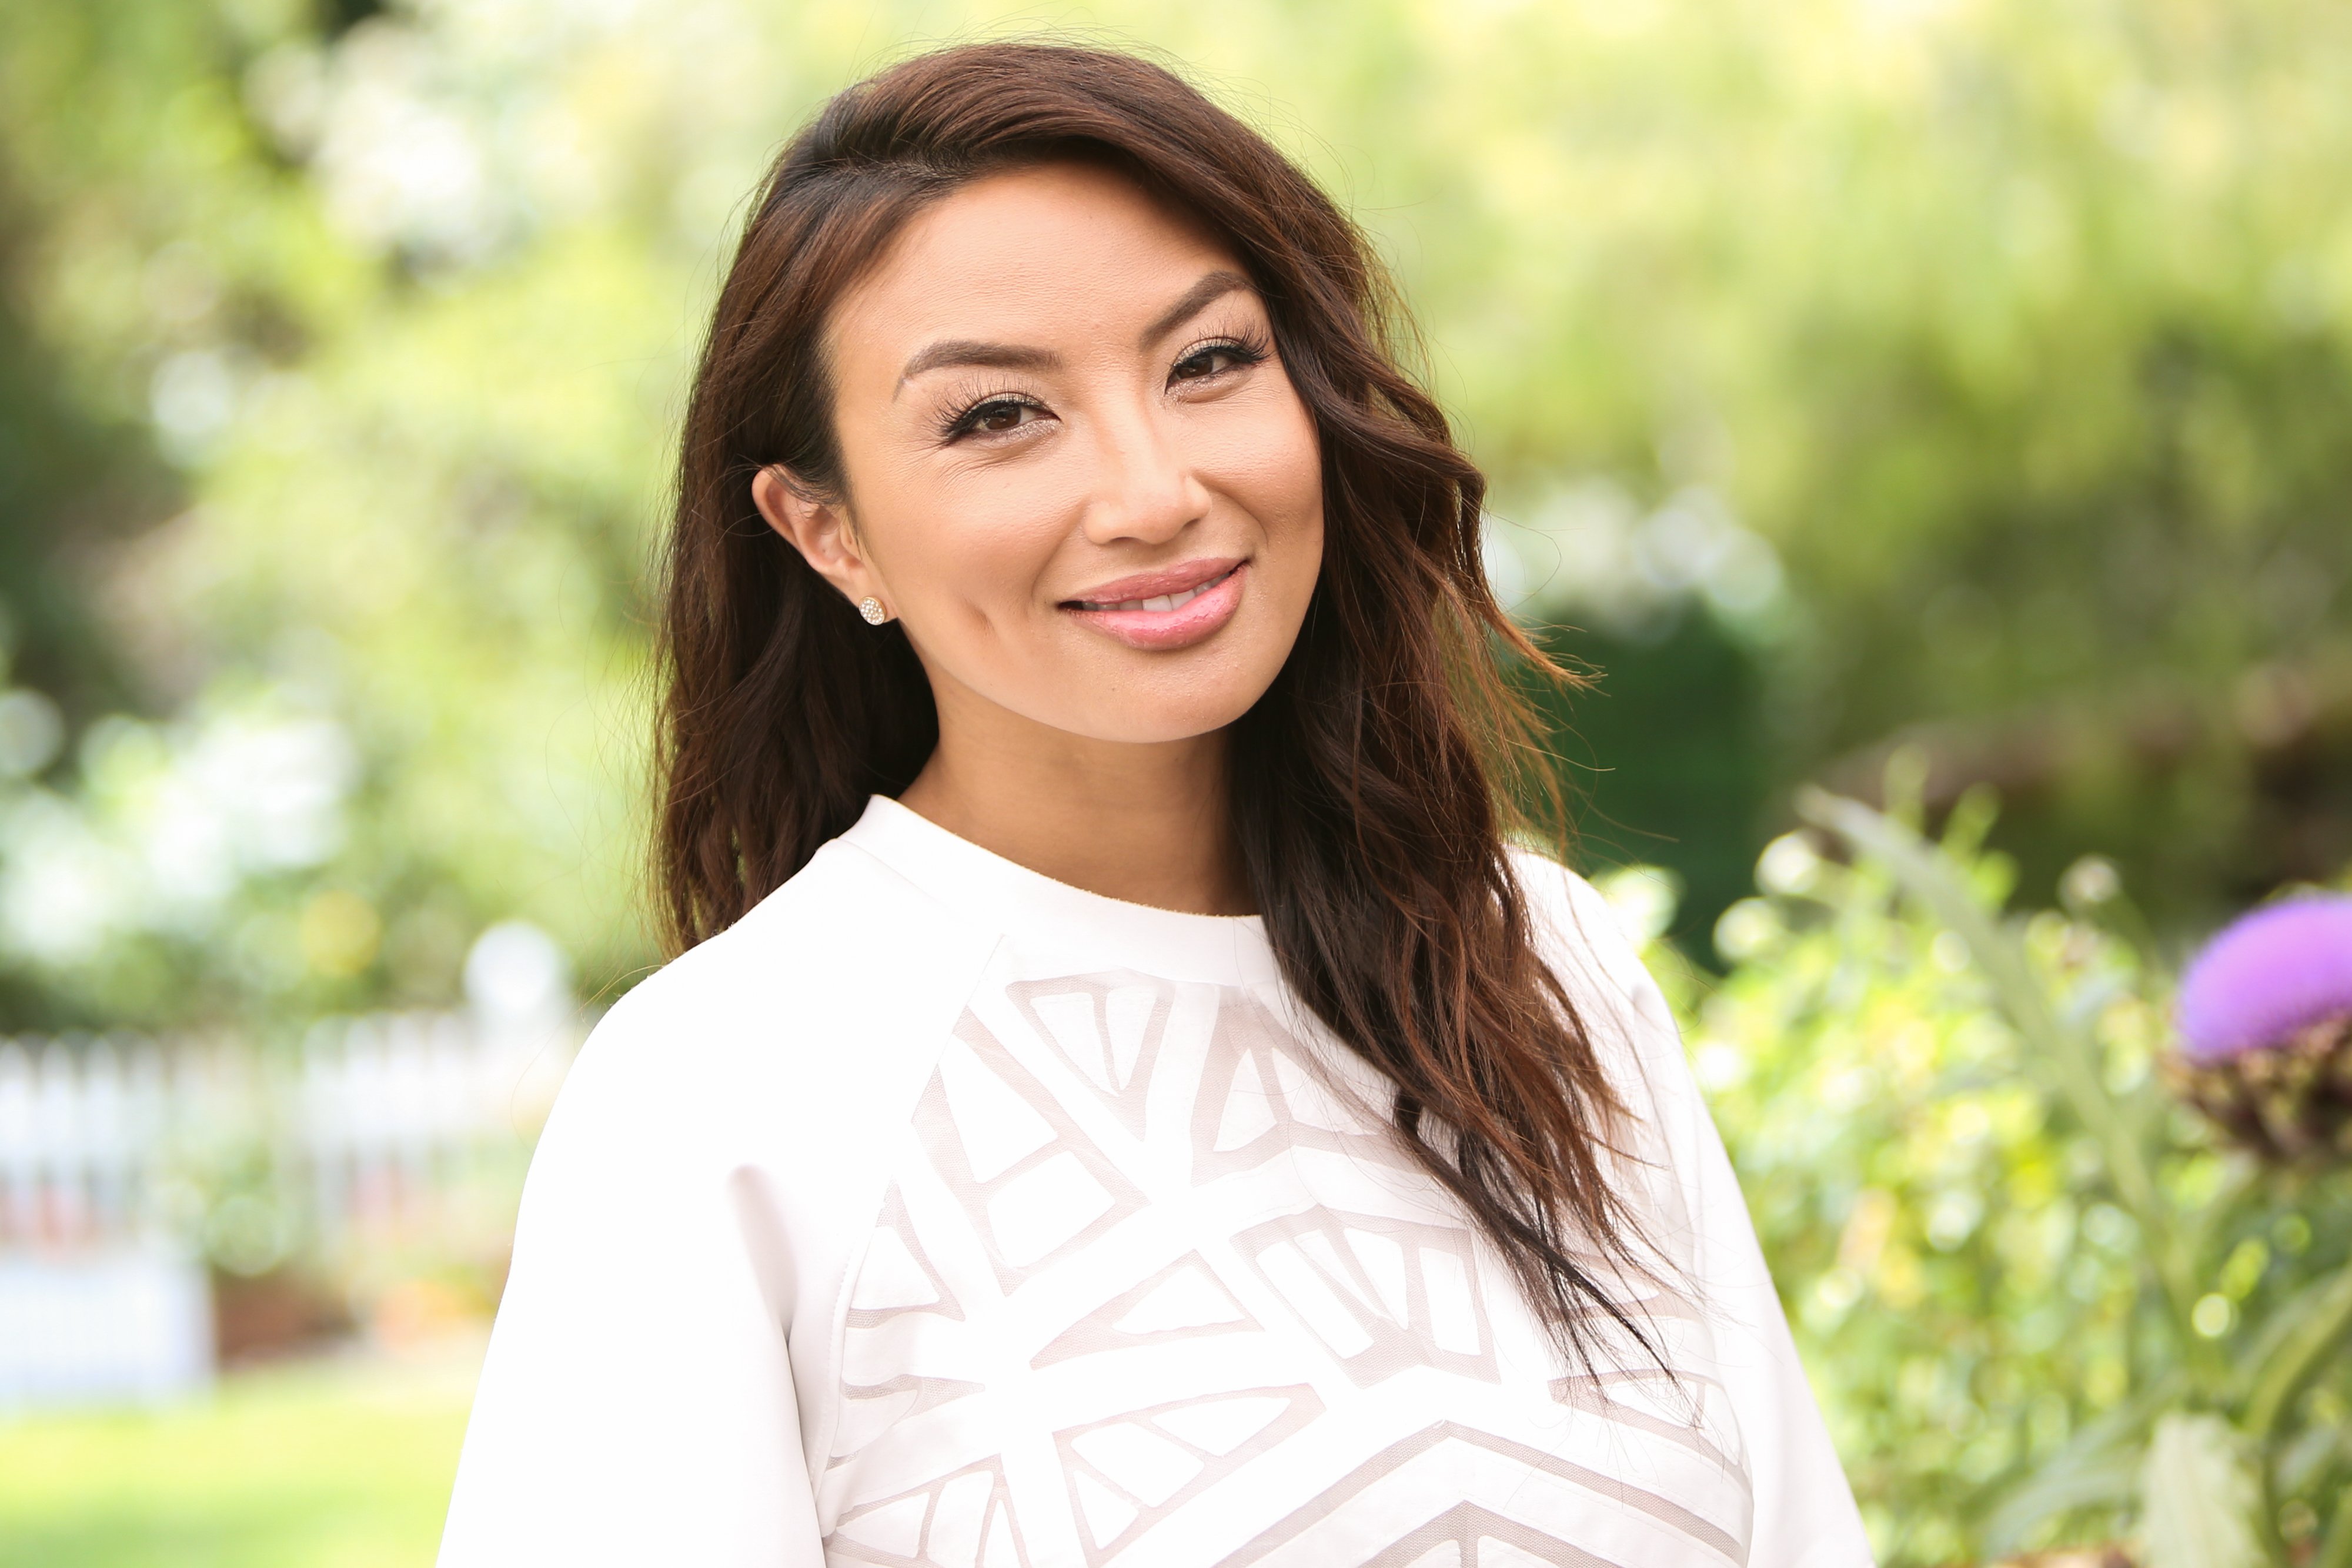 Jeannie Mai poses at Hallmark's "Home & Family" at Universal Studios Hollywood on June 11, 2019. | Photo: Getty Images